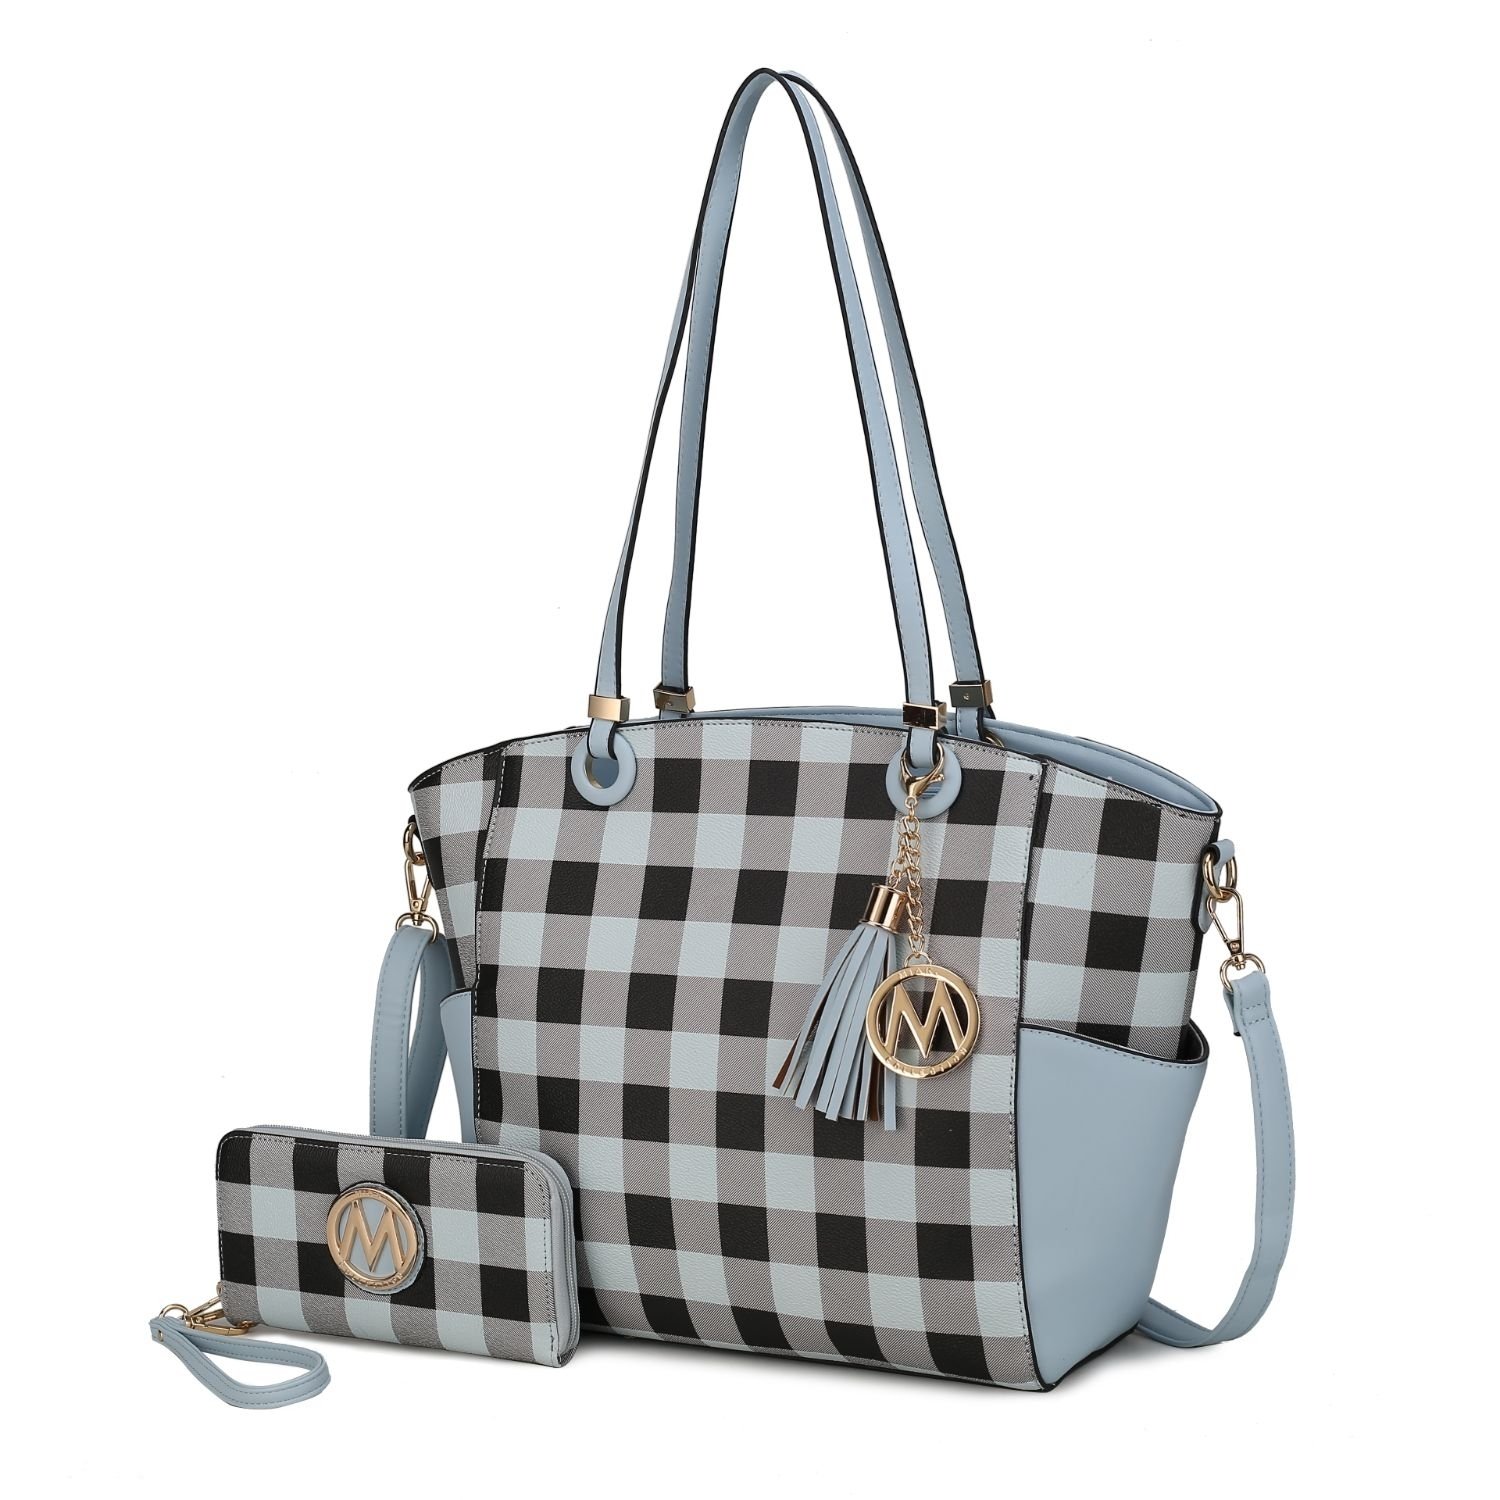 MKF Collection Karlie Tote Handbag With Wallet By Mia K - 2 Pieces - Light Blue